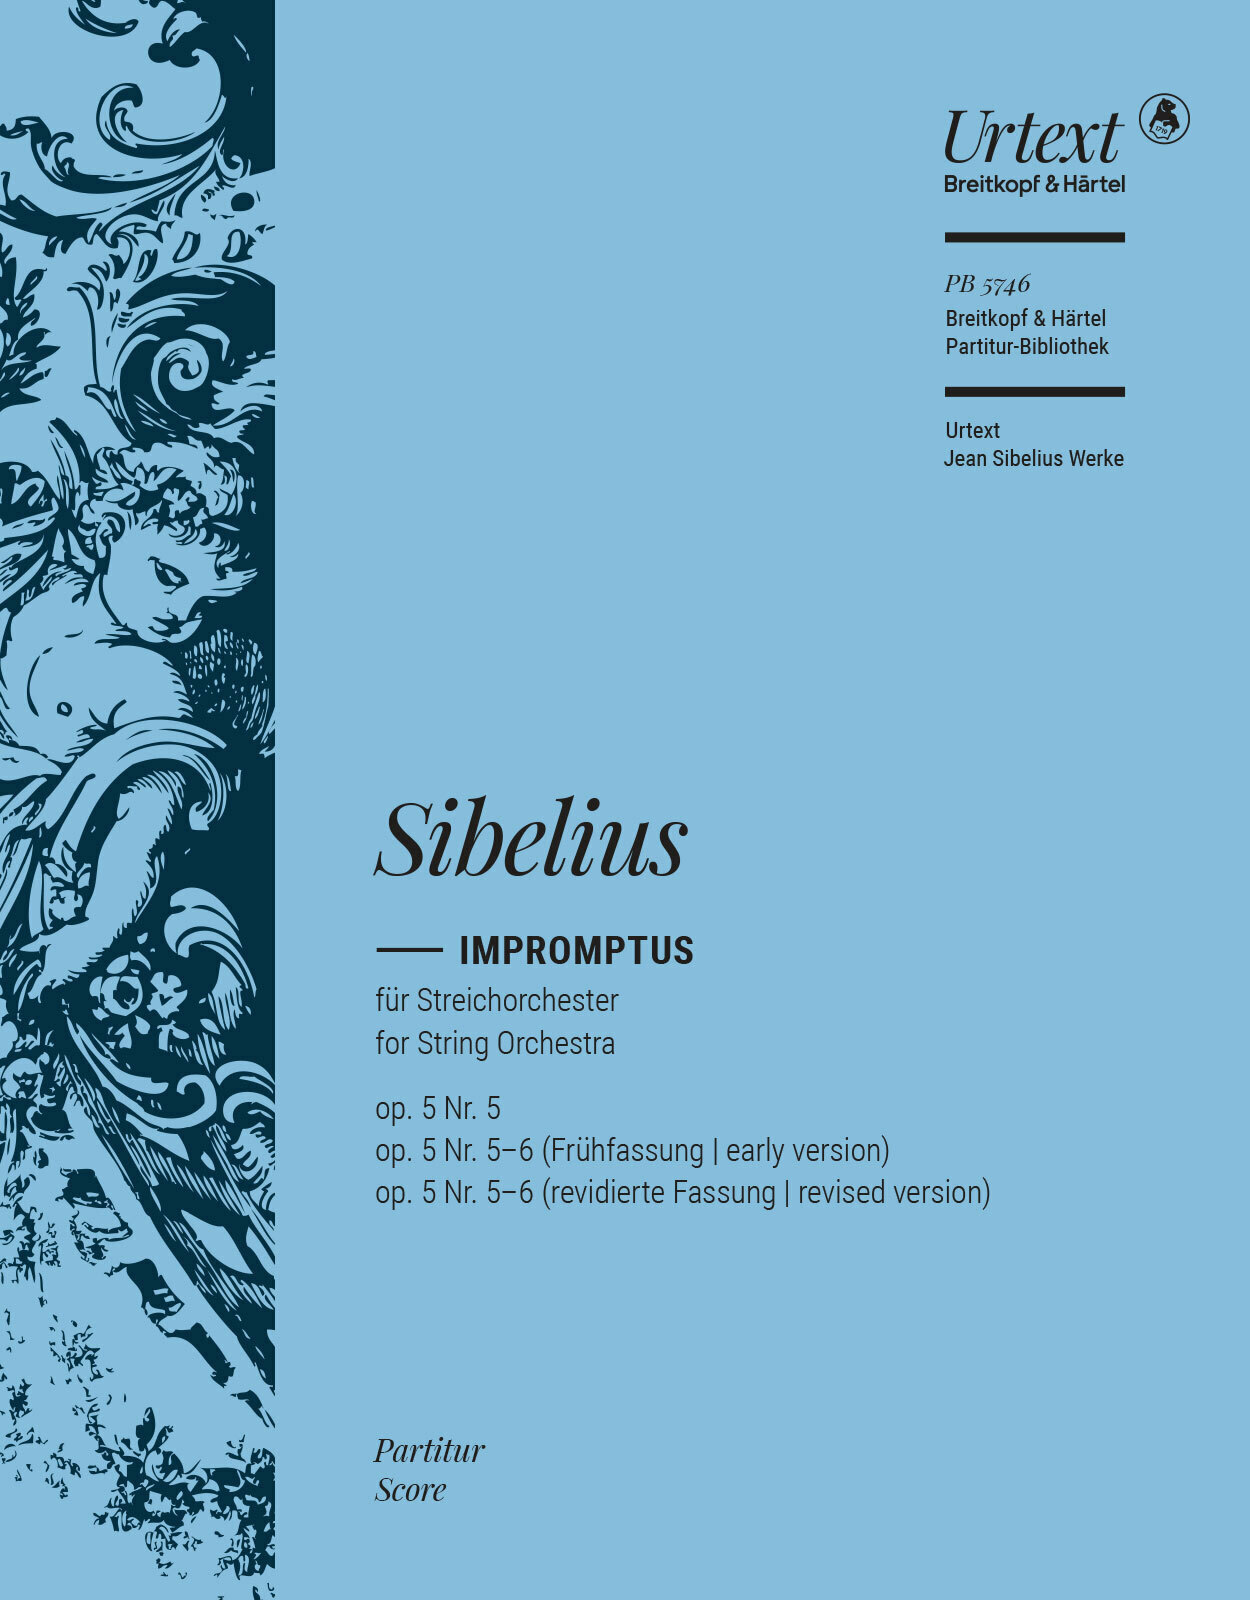 Sibelius Impromptus For String Orchestra Score Sheet Music Songbook